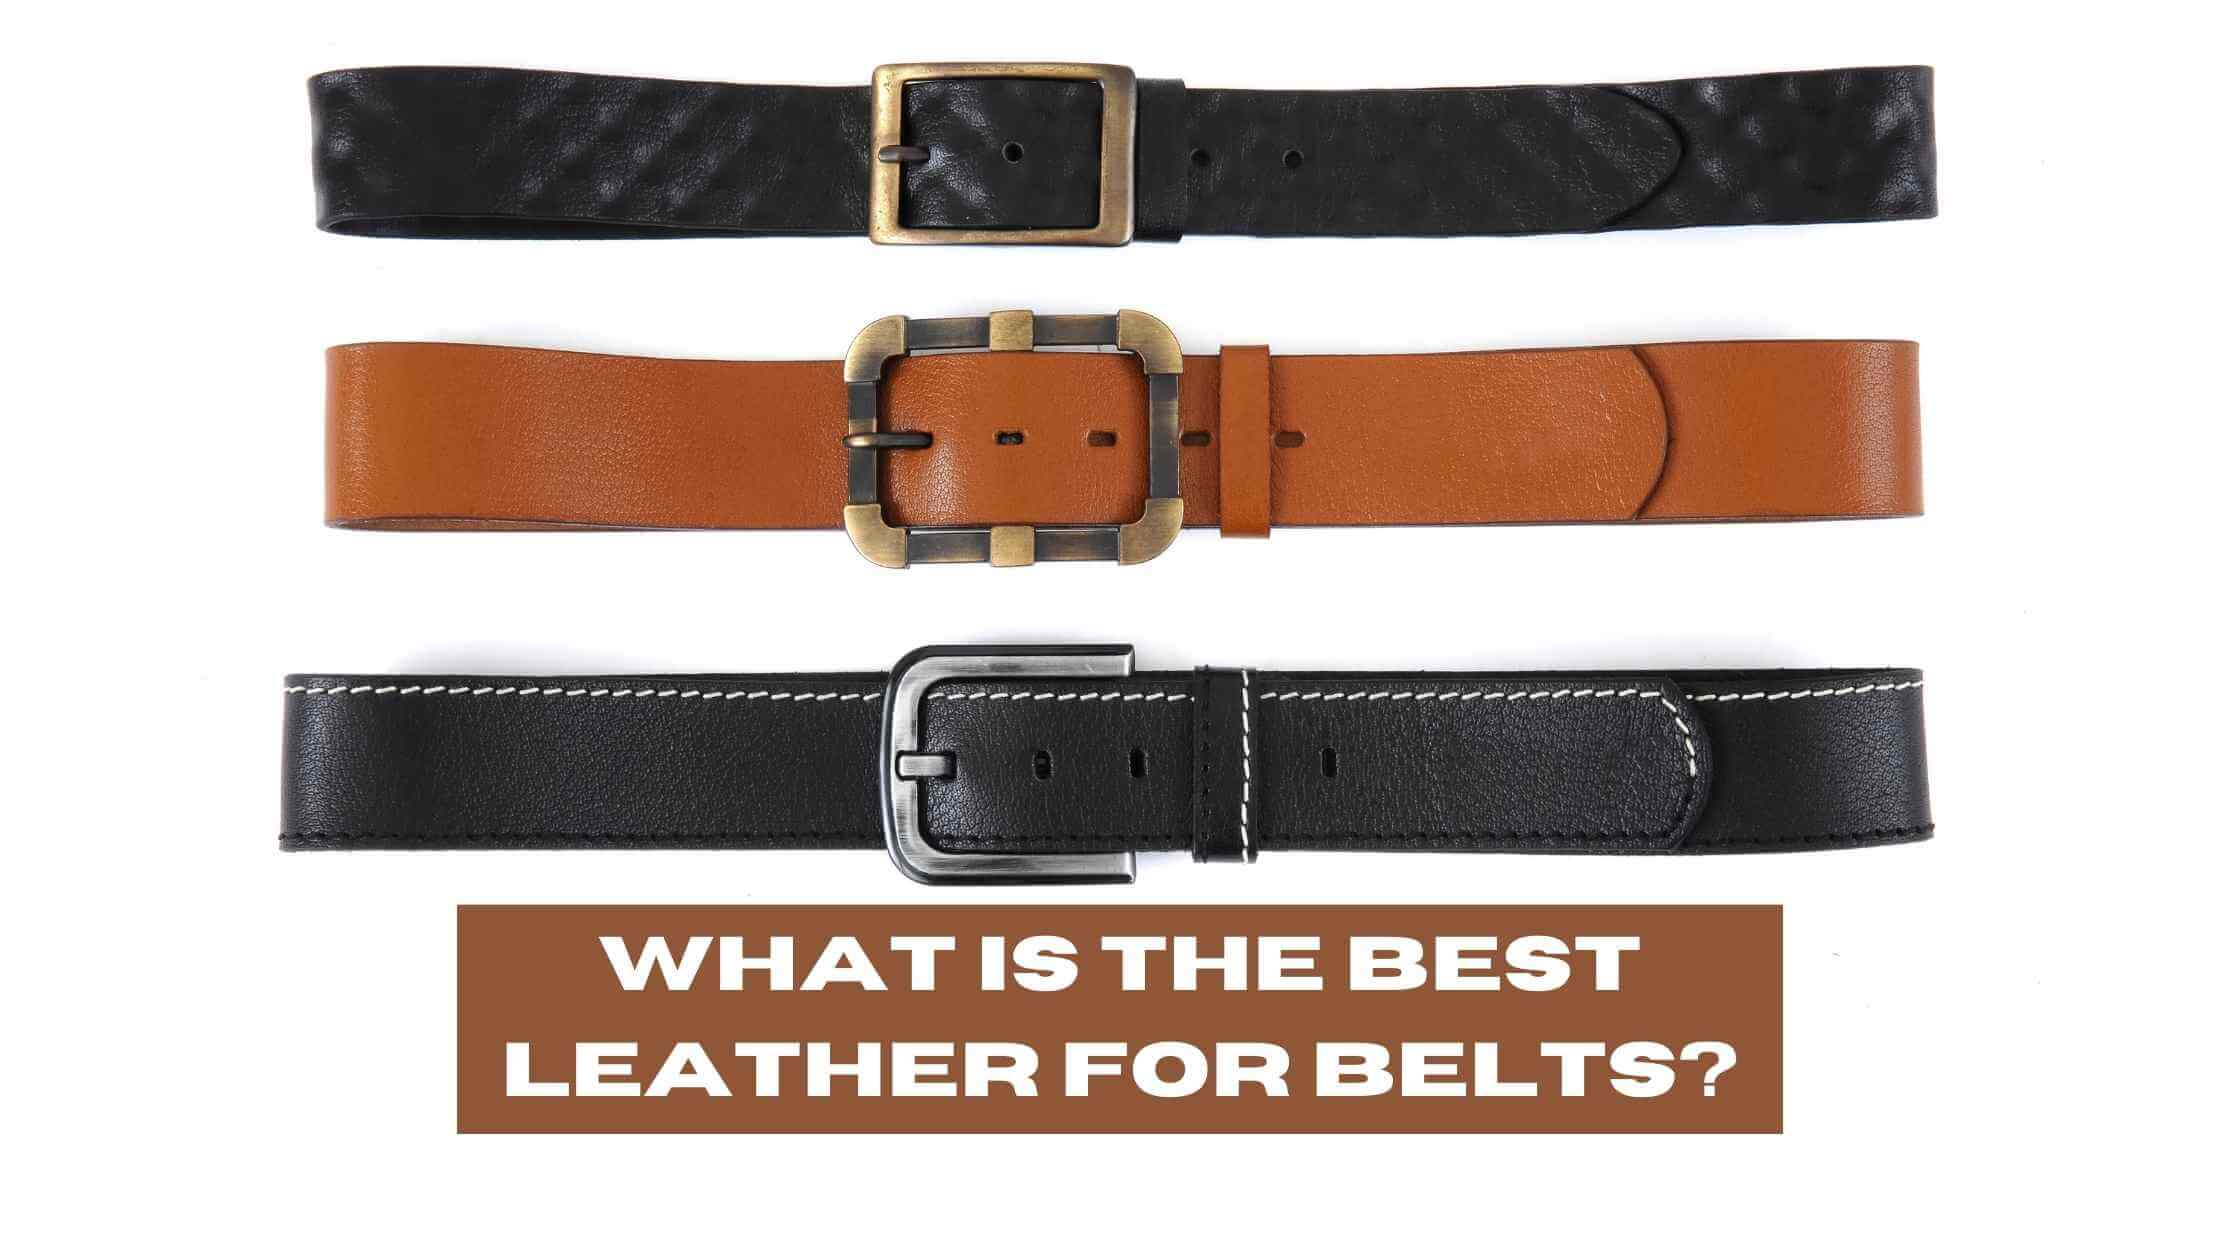 Best Leather For Belts